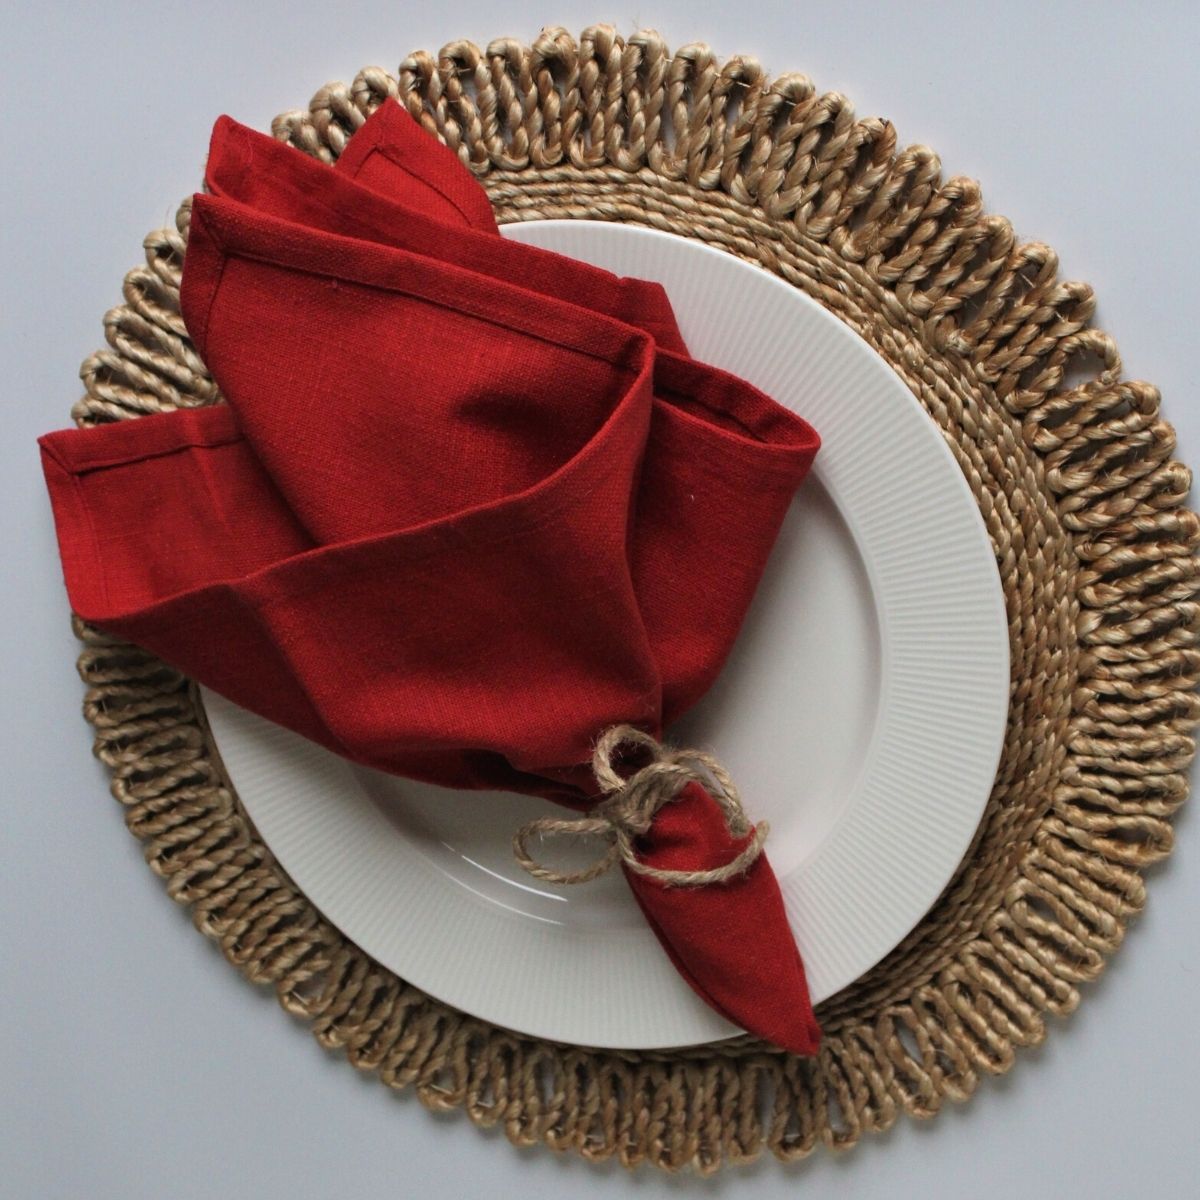 Sample Red solid colour cotton napkins - set of 4